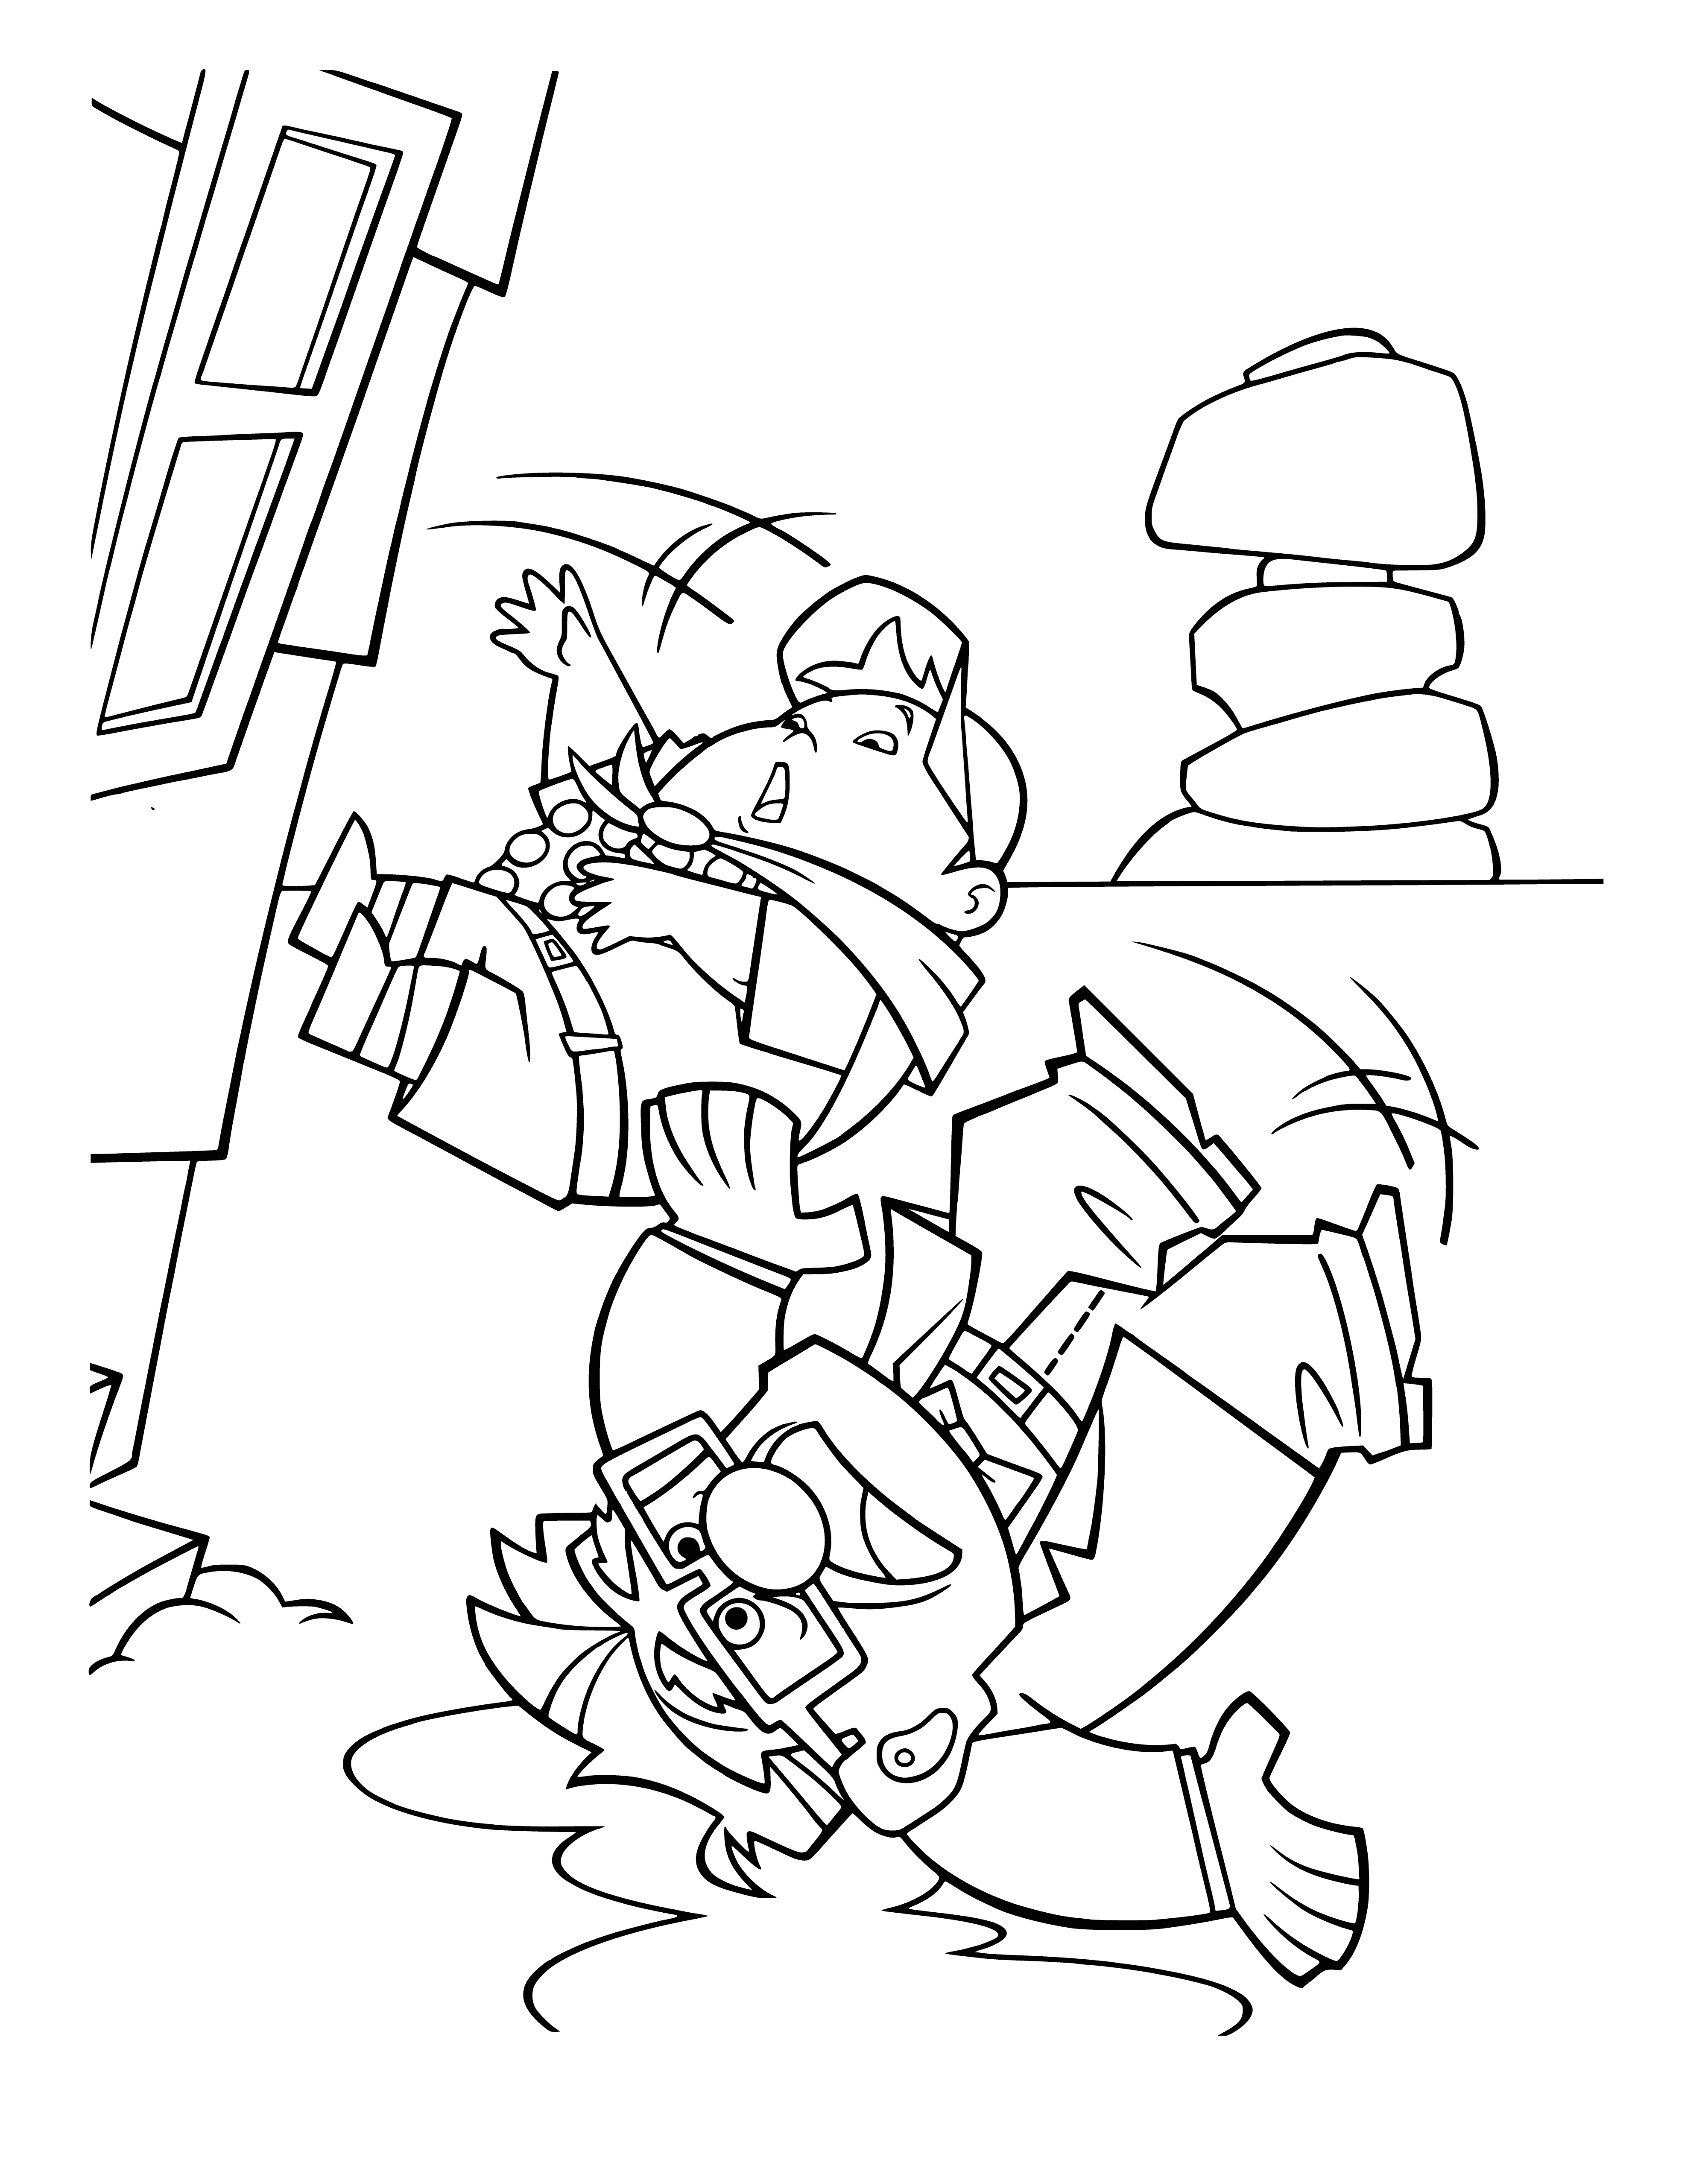 coloring page: Small plane emergency landed in grassy field with people aiding occupants.